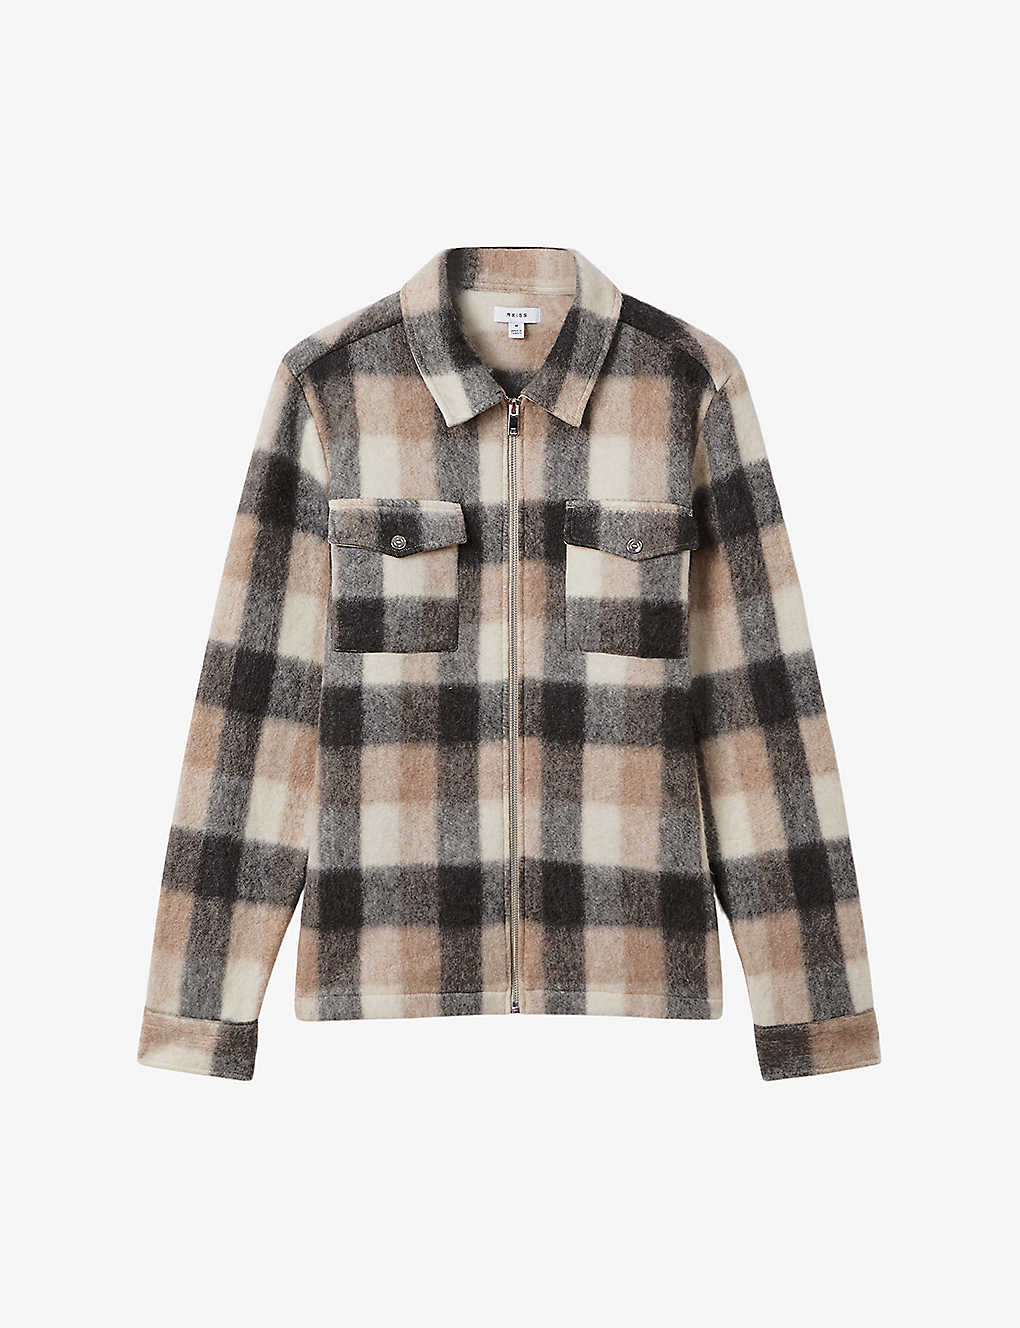 Reiss Stamford - Oatmeal/grey Brushed Check Overshirt, M